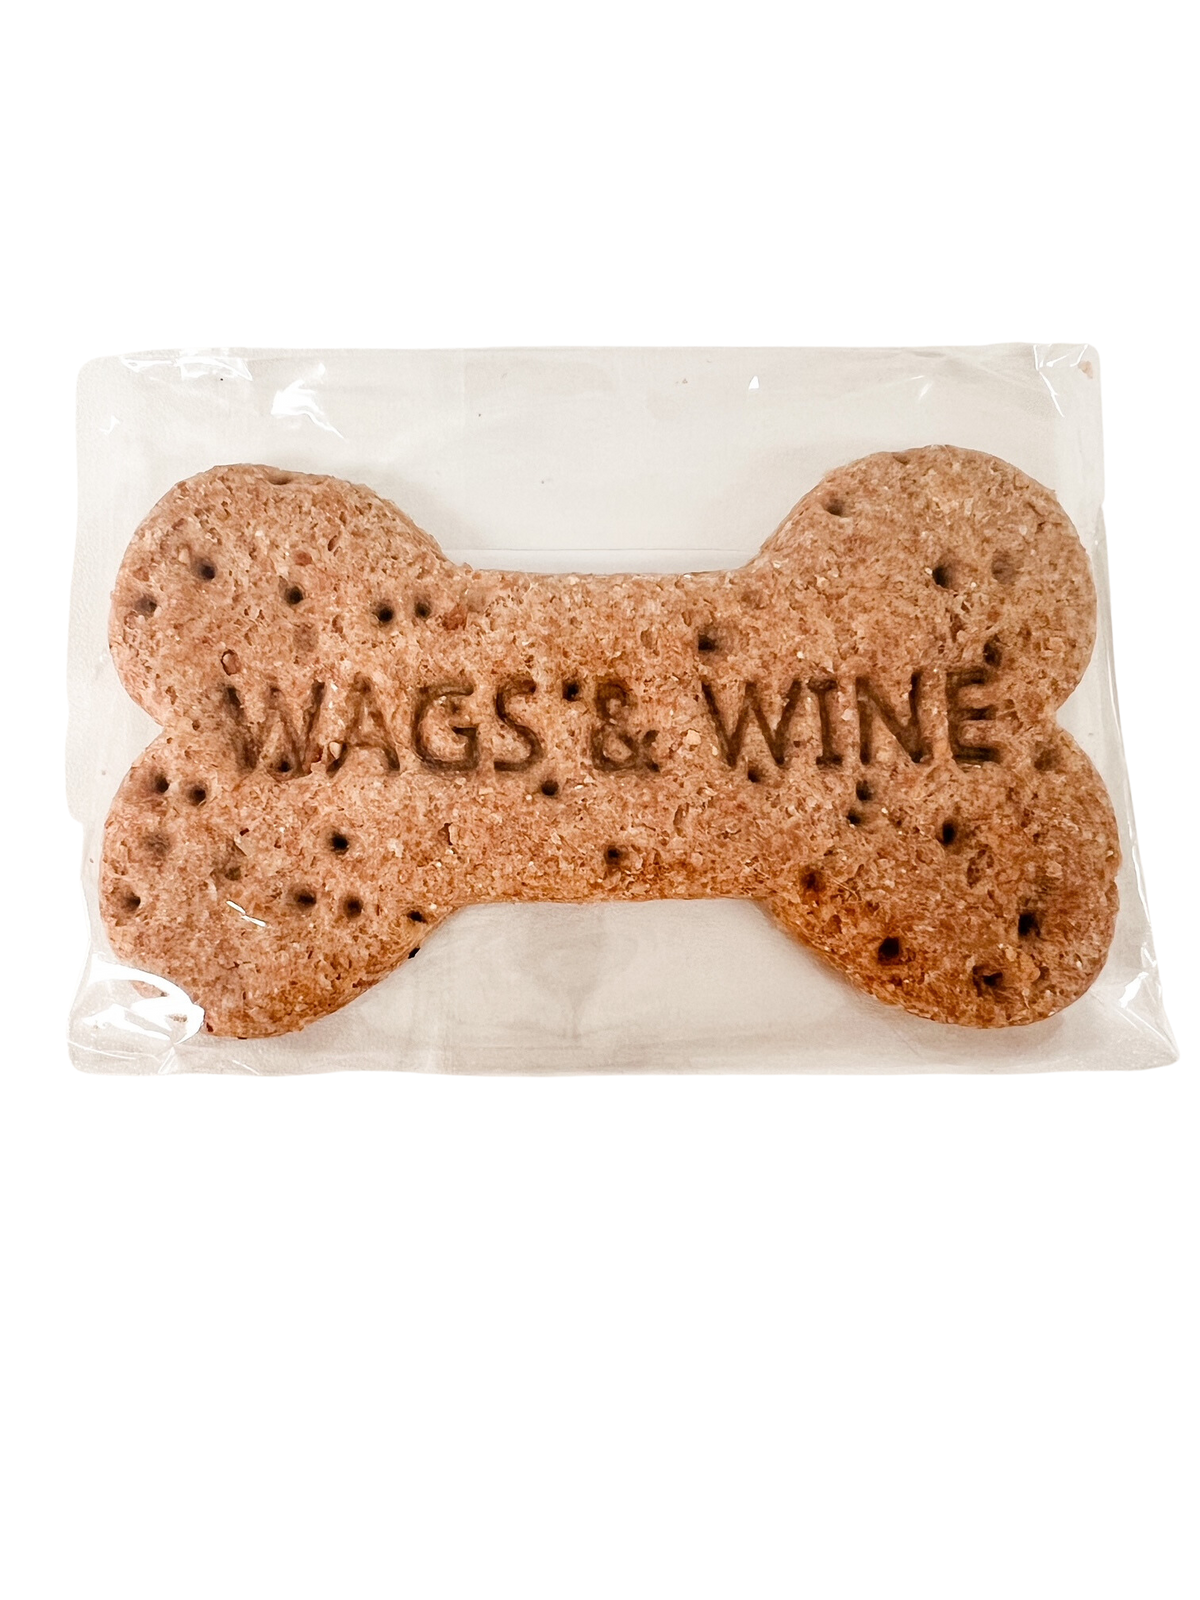 Wags & Wine Cookie